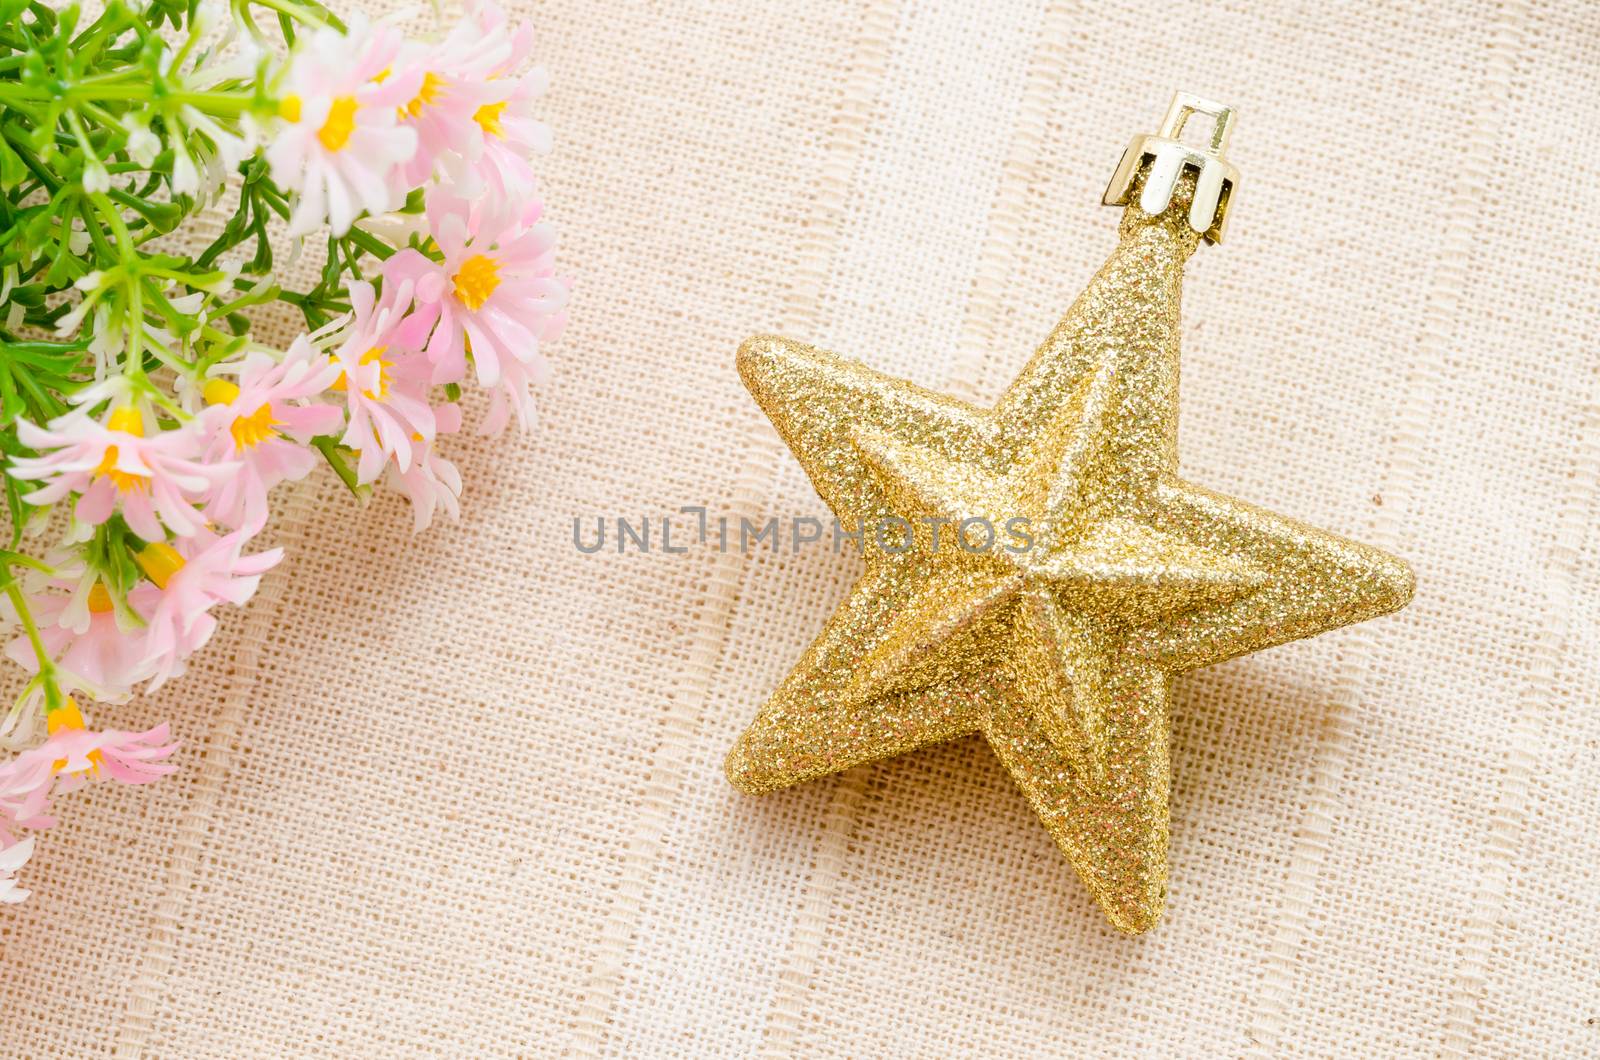 Gold five pointed star christmas decoration with flower on fabric background.